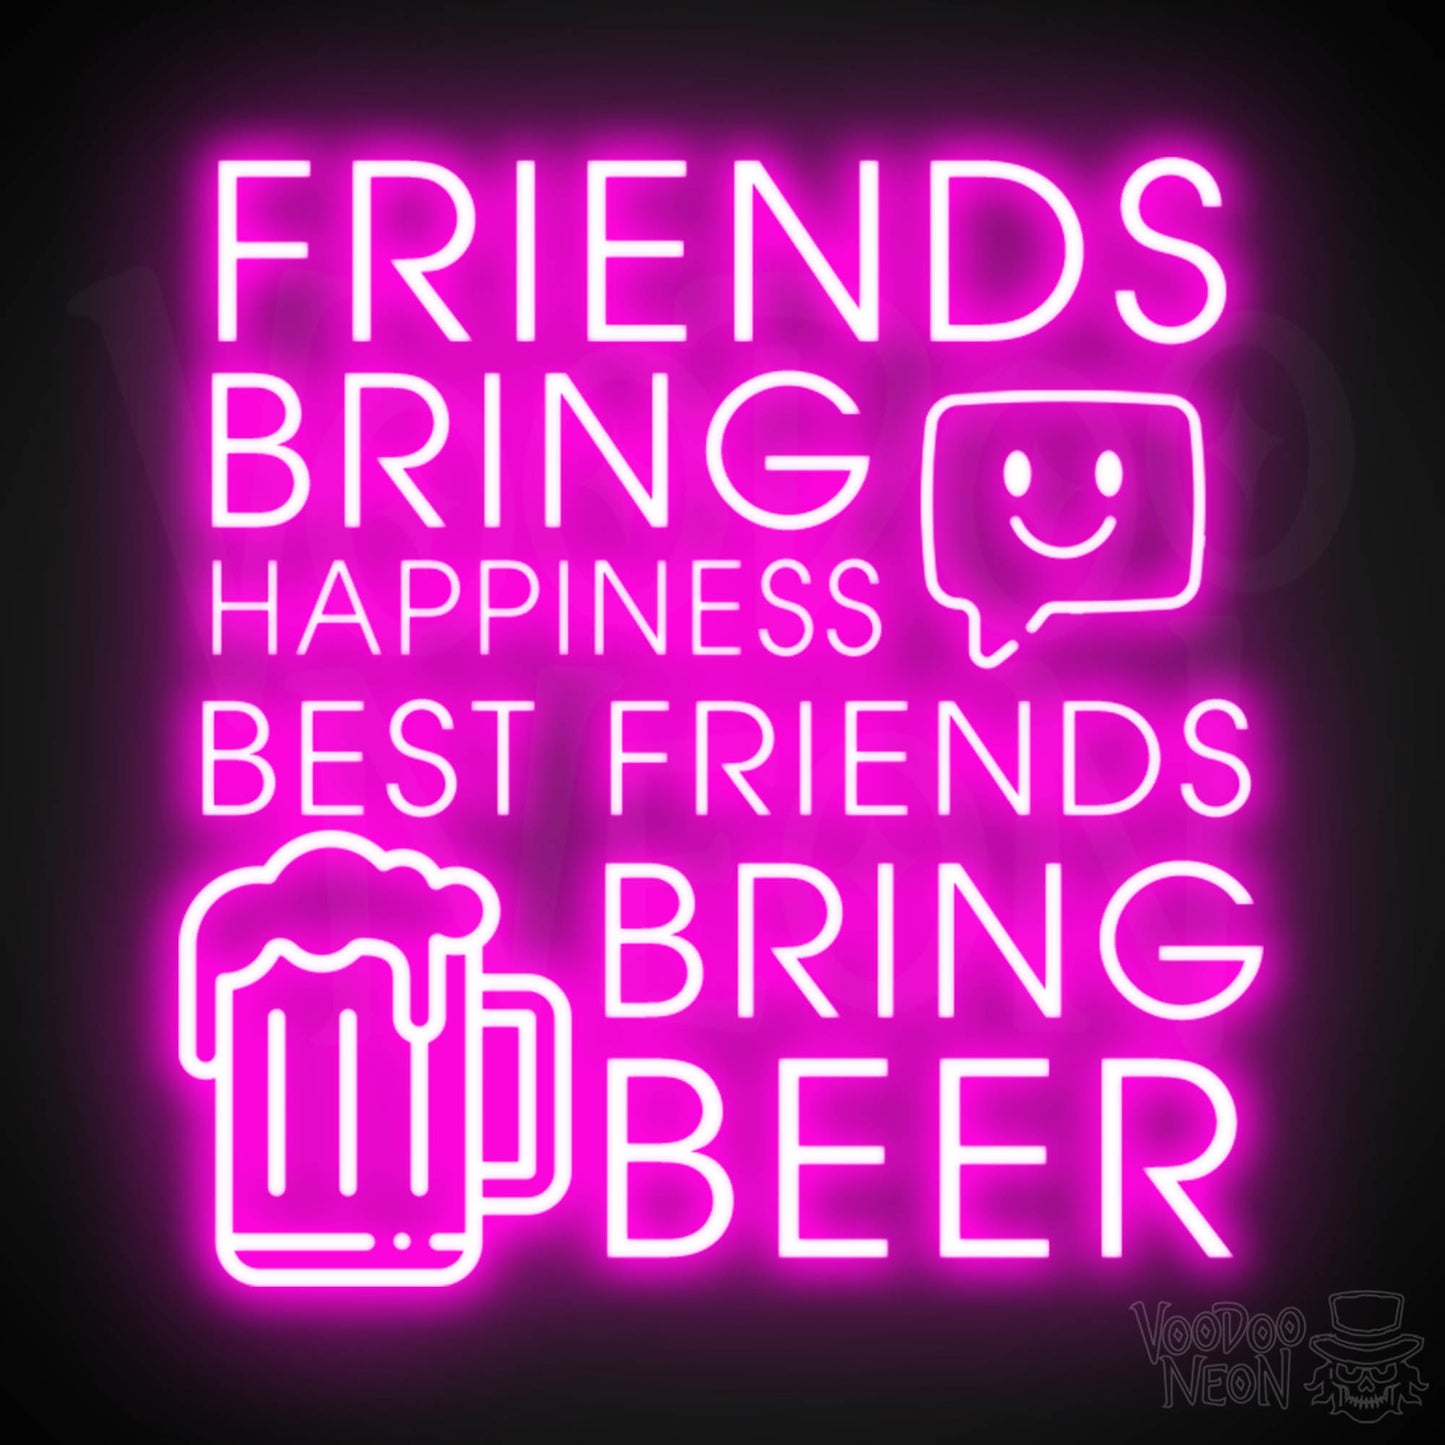 Friends Bring Happiness Best Friends Bring Beer Neon Sign - LED Lights Wall Art - Color Pink